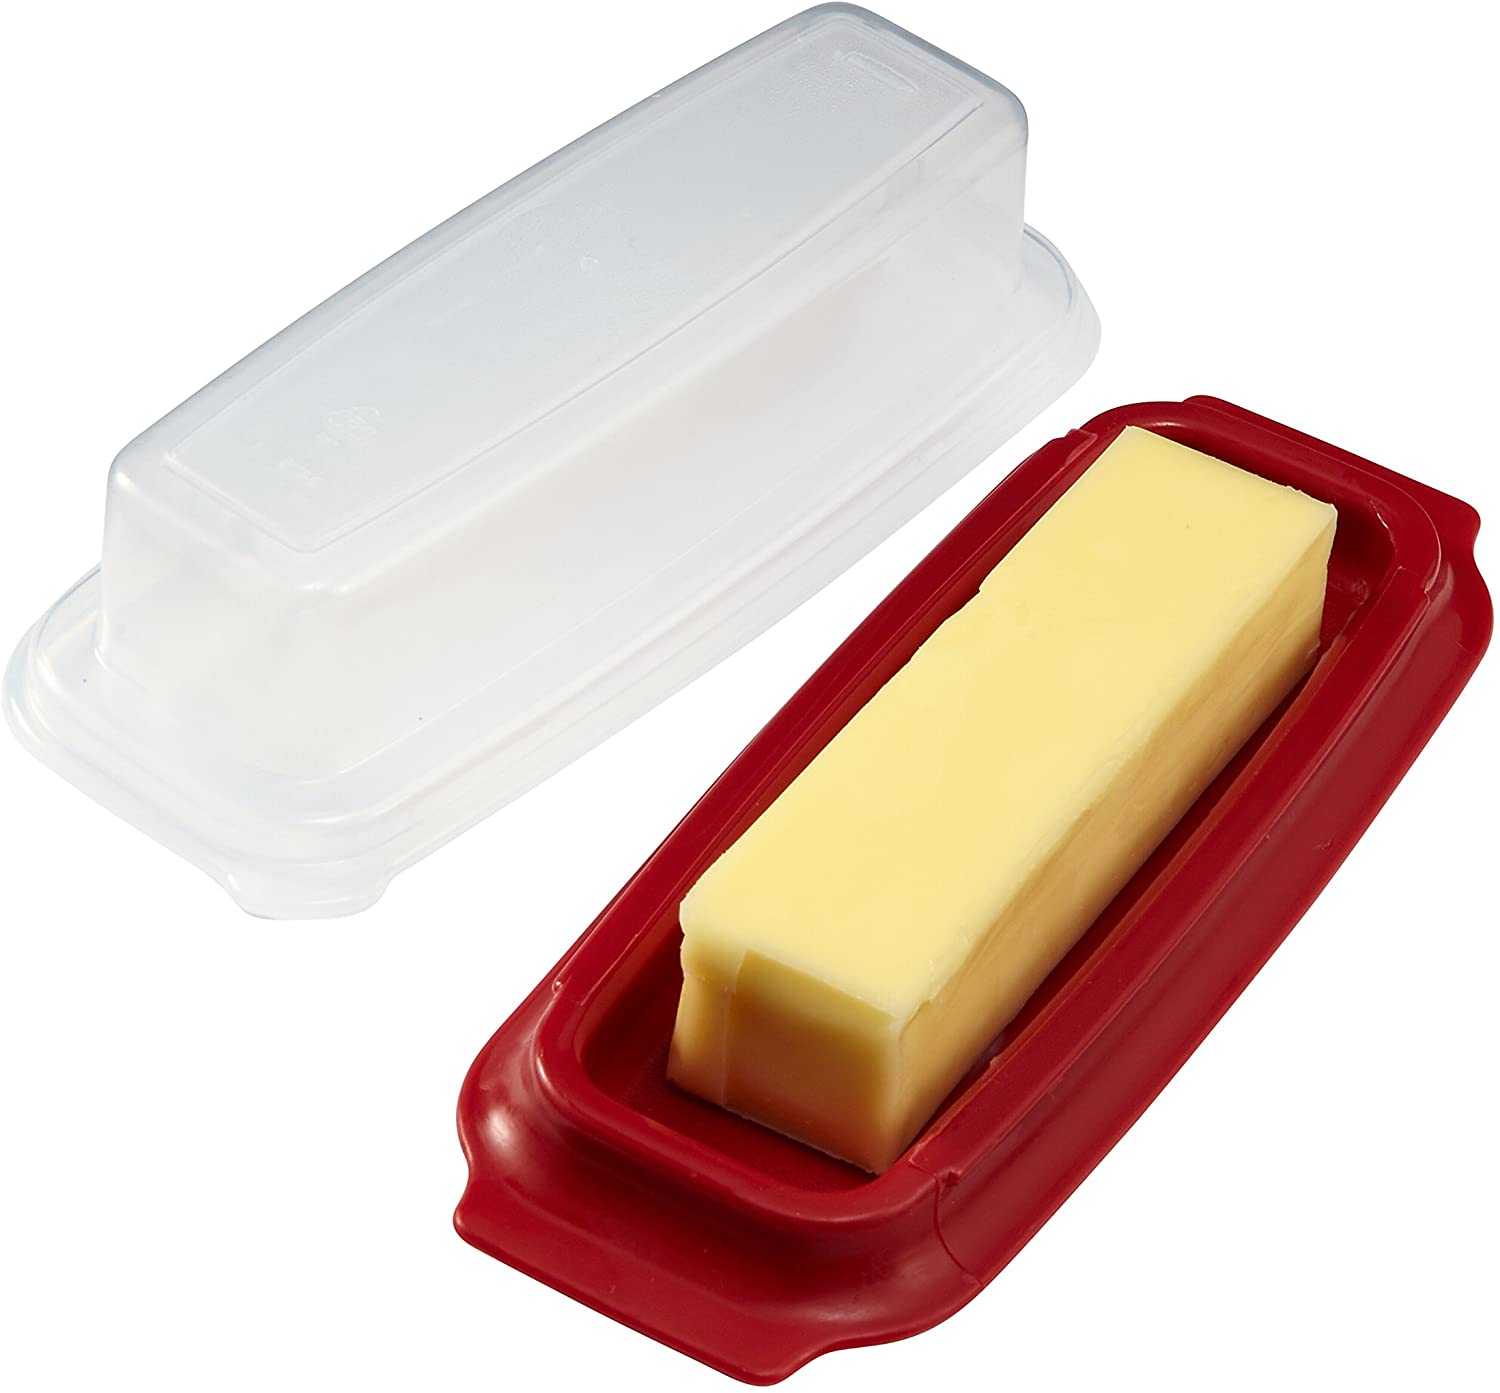 Rubbermaid Dedicated Storage Standard Butter Dish - Whole and All